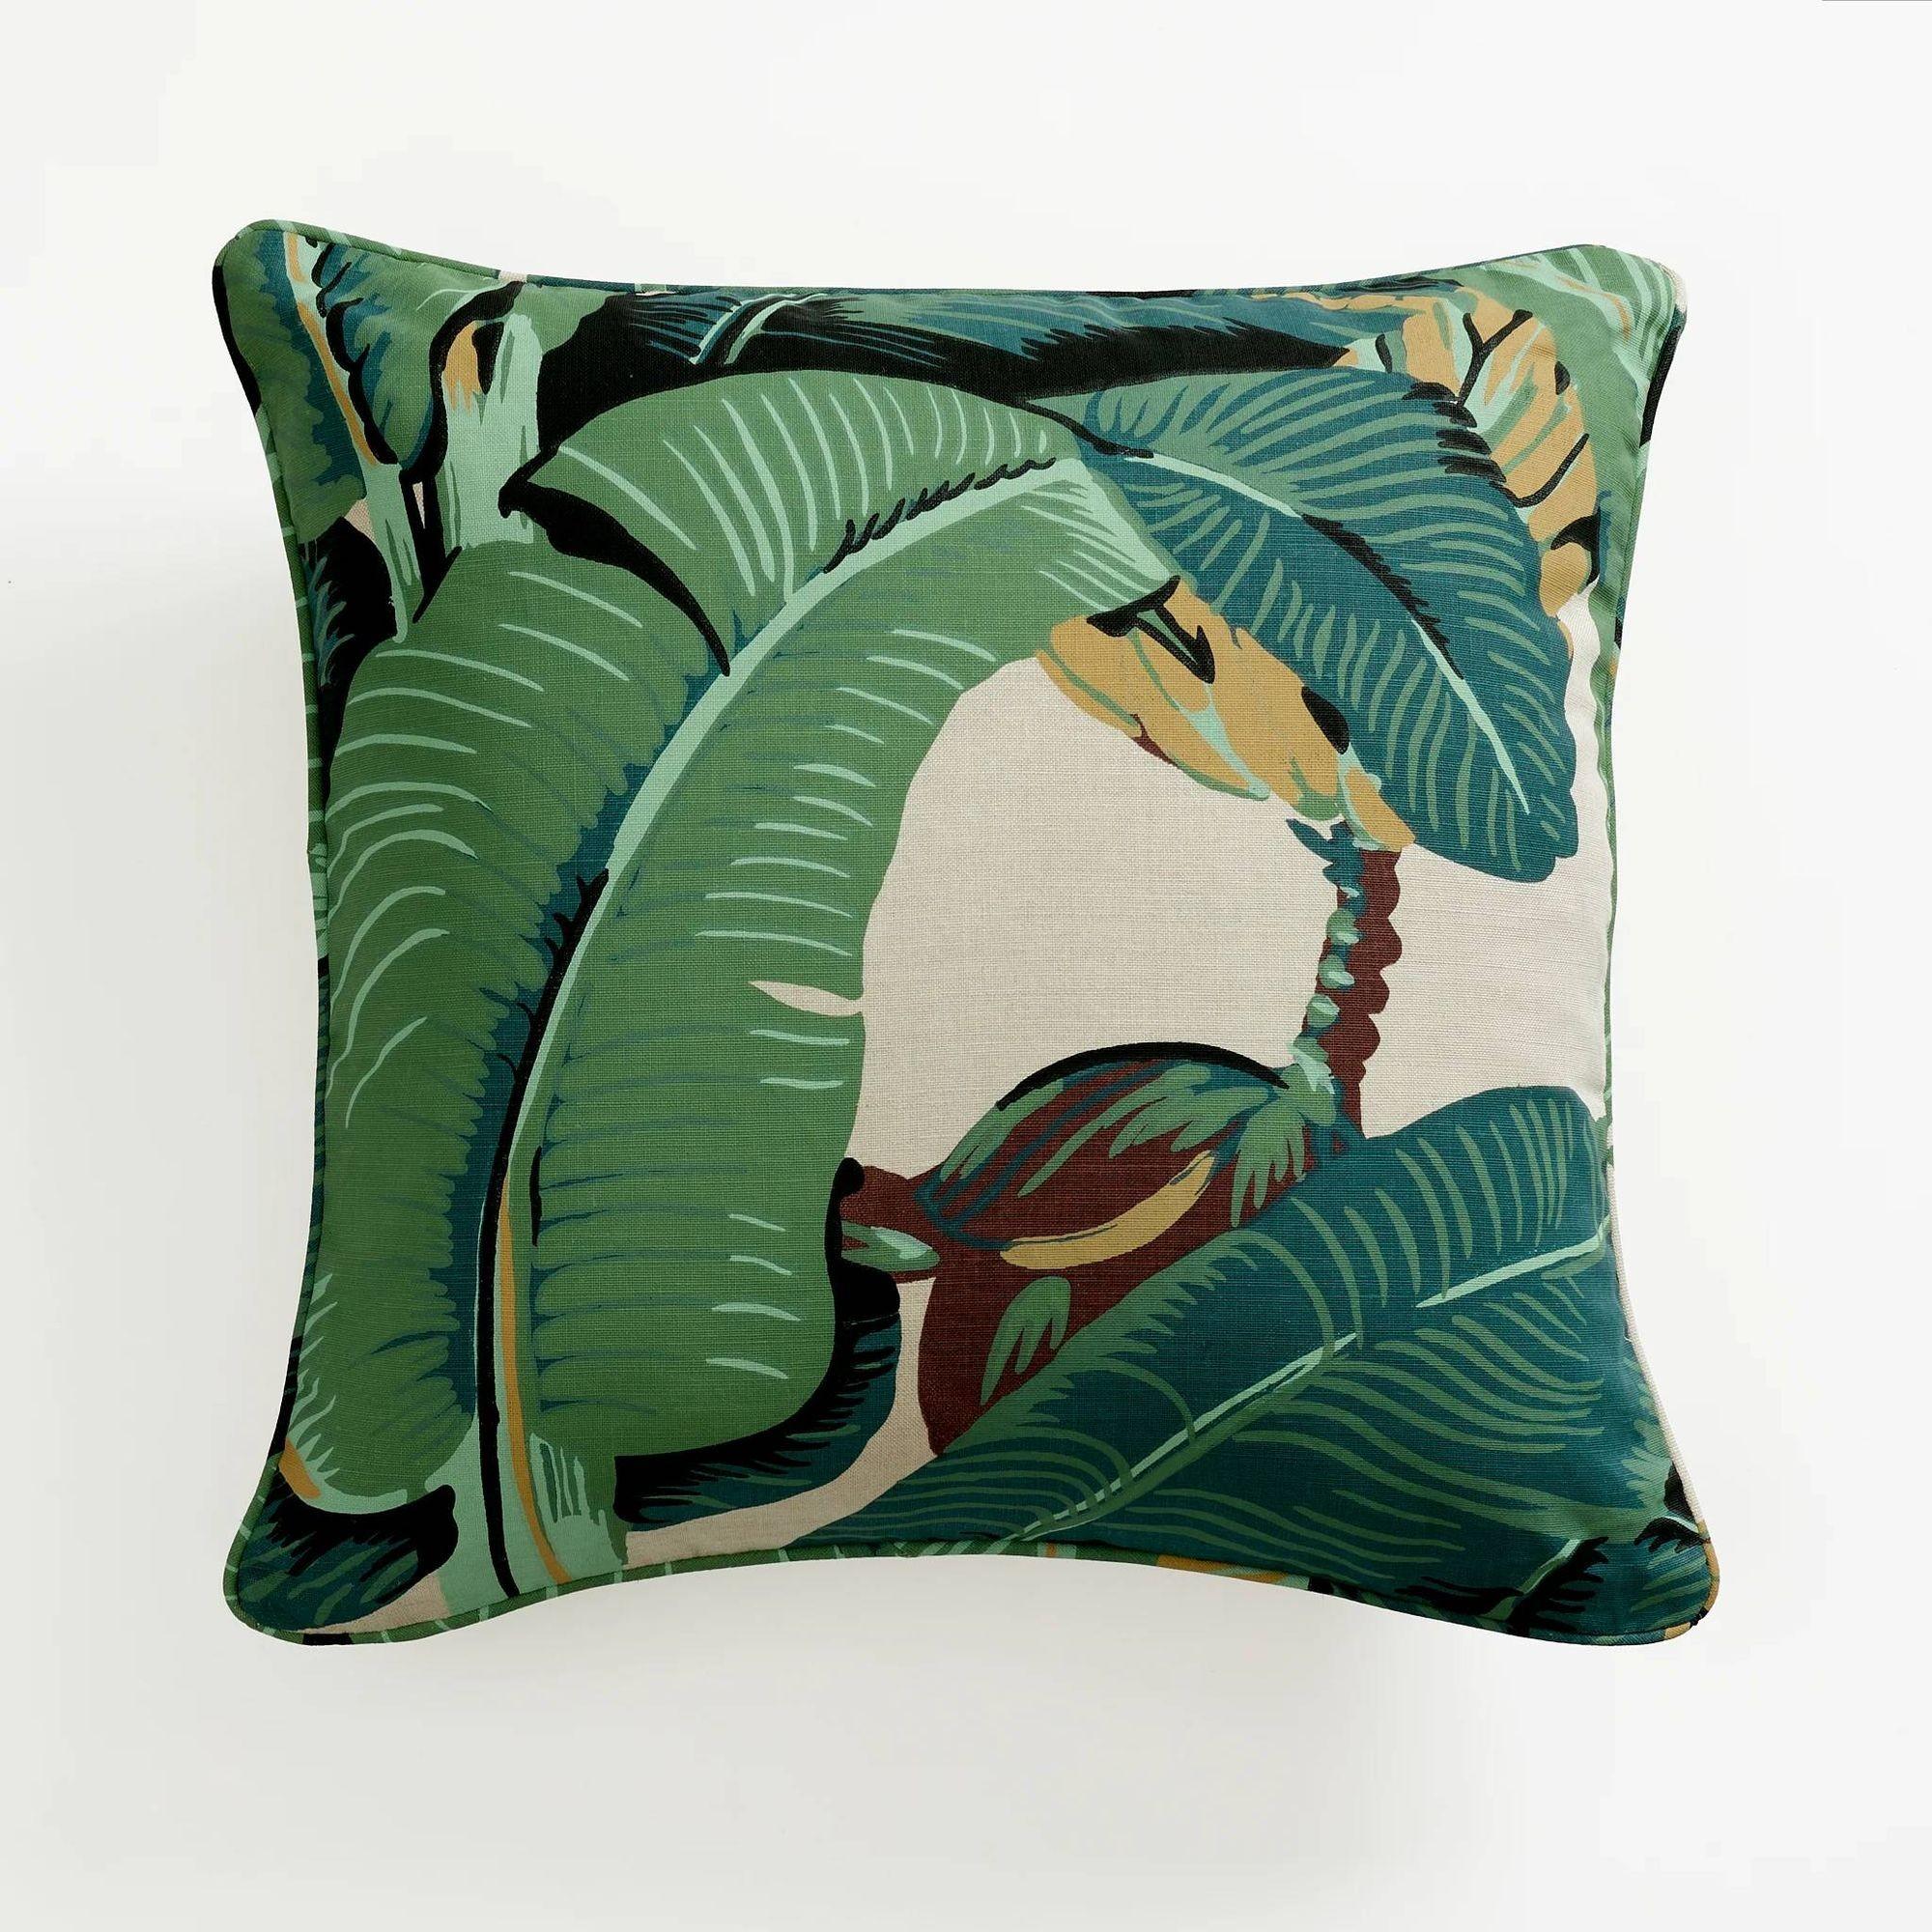 Add a touch of timeless Hollywood glamour to your home decor with this unused throw pillow, featuring the iconic Martinique Banana Leaf fabric from The Beverly Hills Hotel. Hand-screened and painted by the original manufacturer in Los Angeles, this